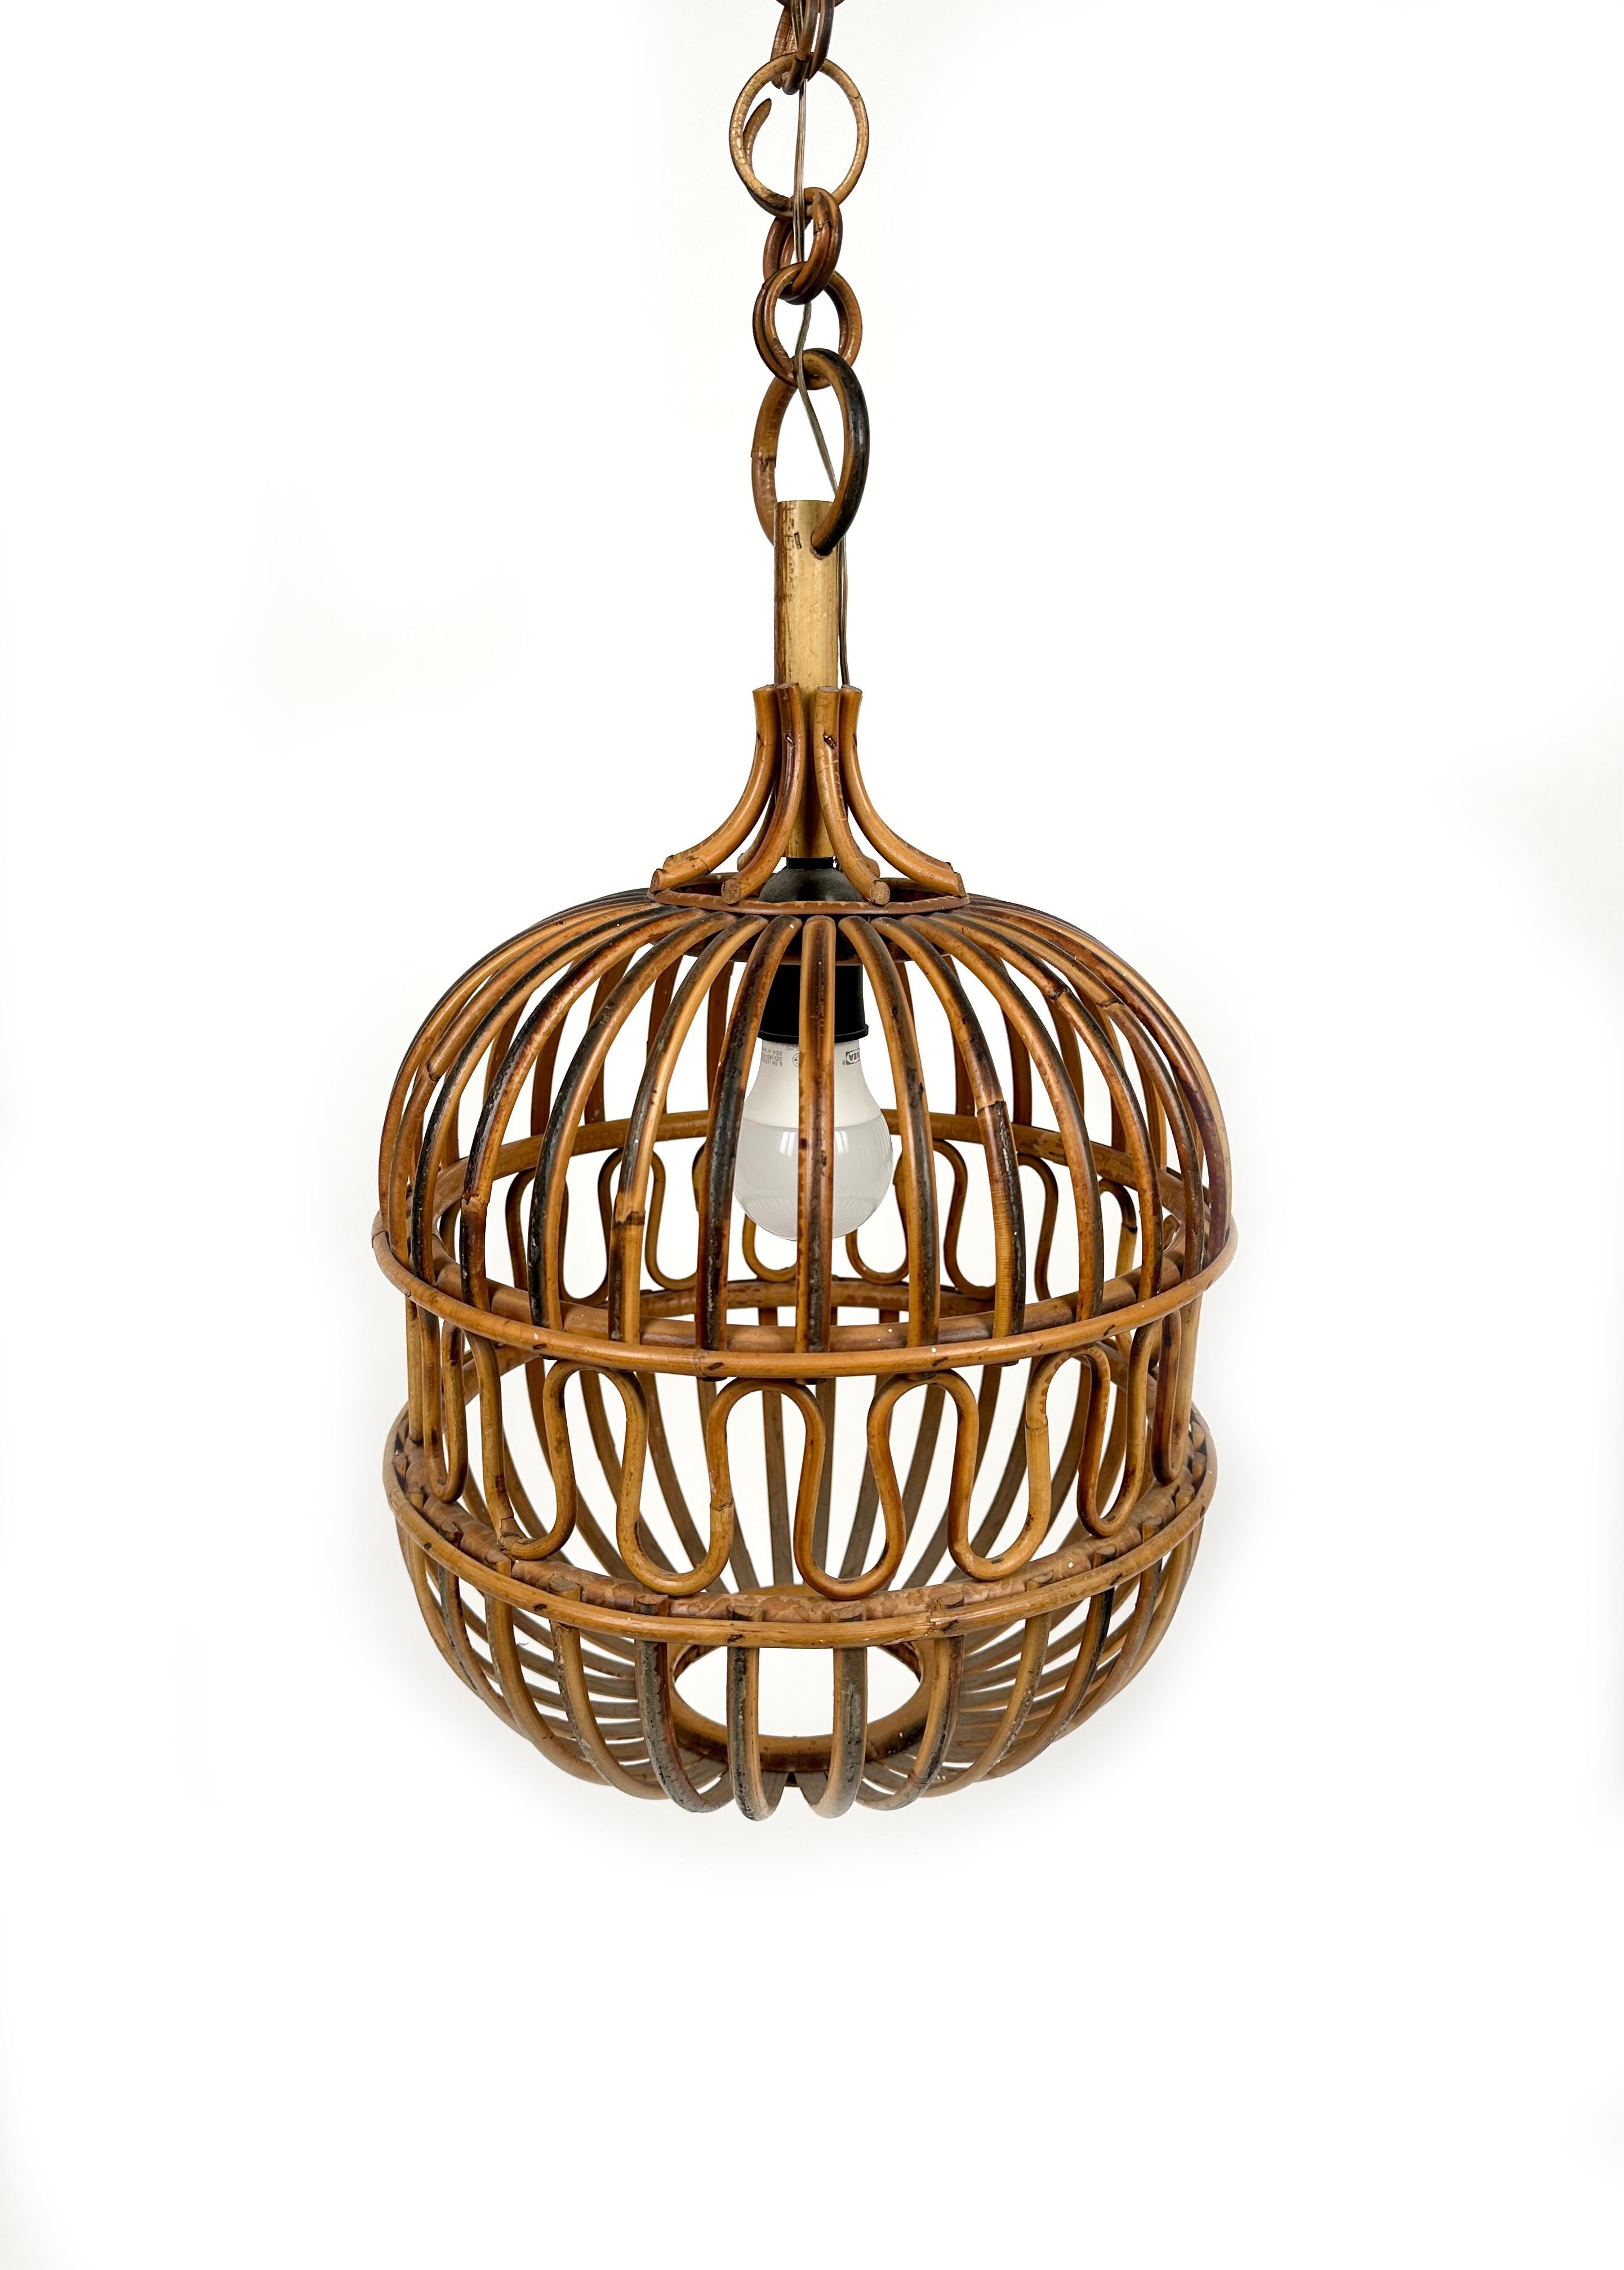 Italian Midcentury Chandelier in Rattan and Bamboo, Italy, 1960s For Sale